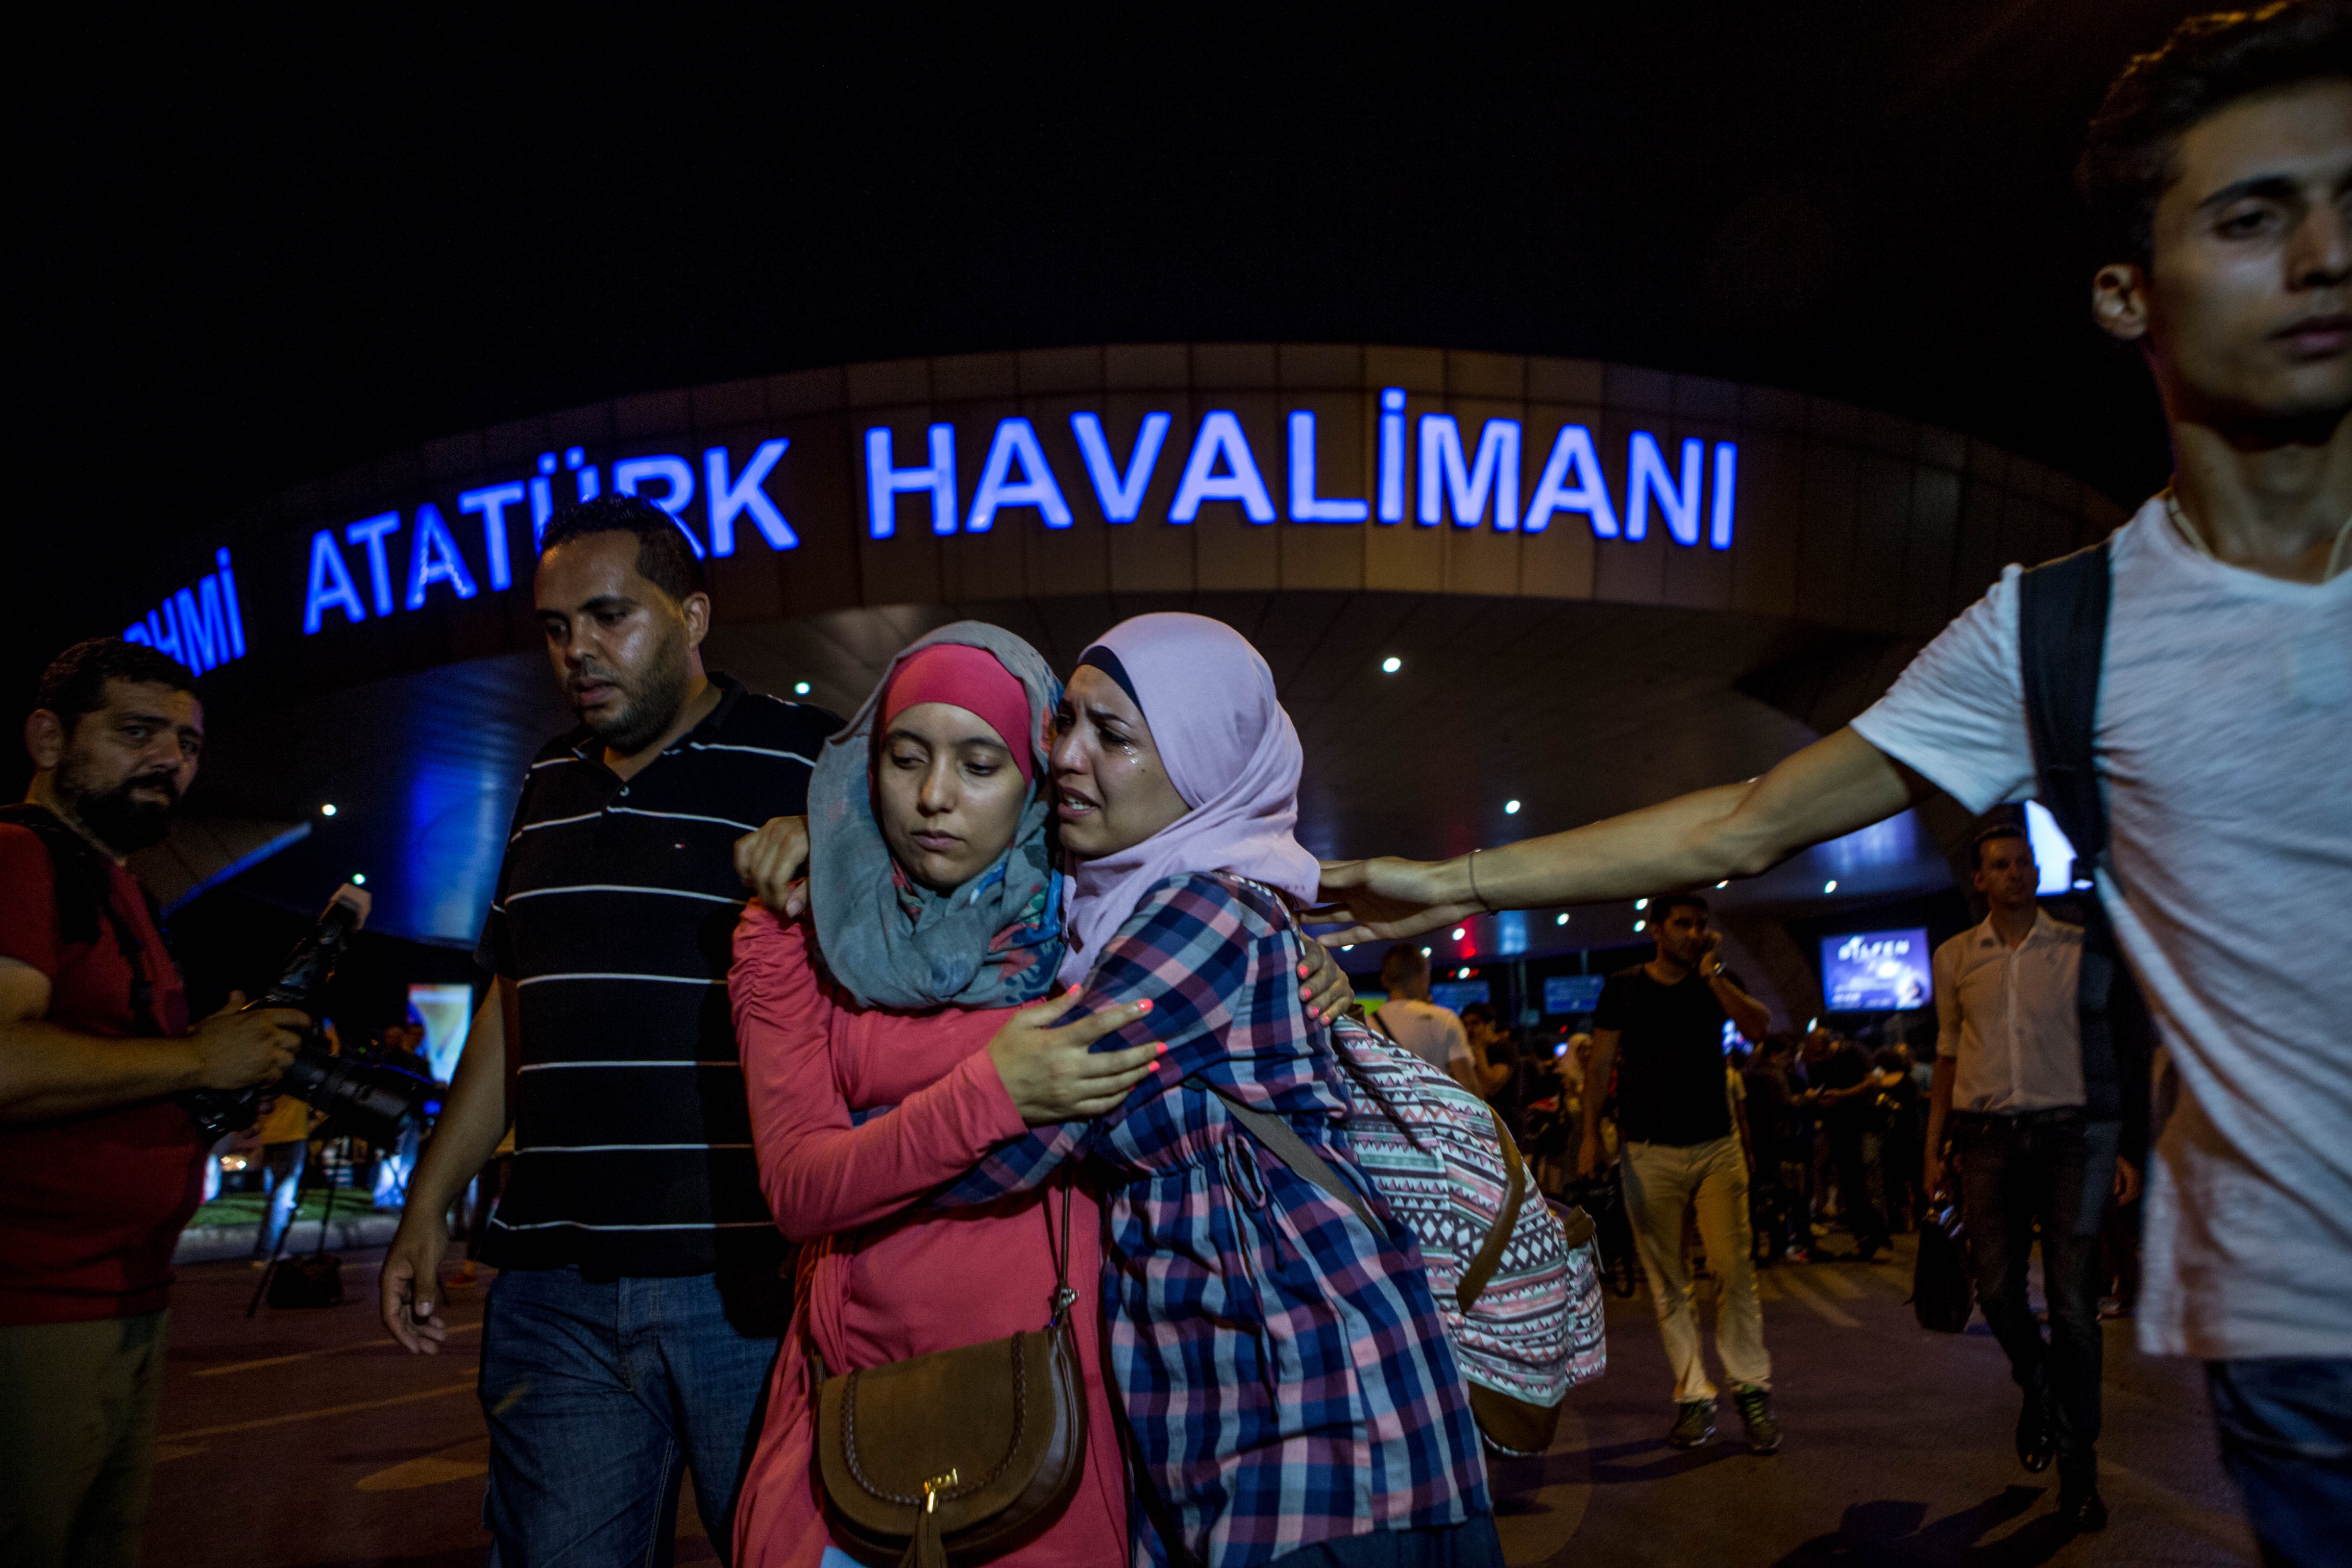 Passengers leave Istanbul Ataturk Airport, Turkey's largest airport, after a suicide-bomb attack in the early hours of in Istanbul on June 29, 2016. (Defne Karadeniz—Getty Images)